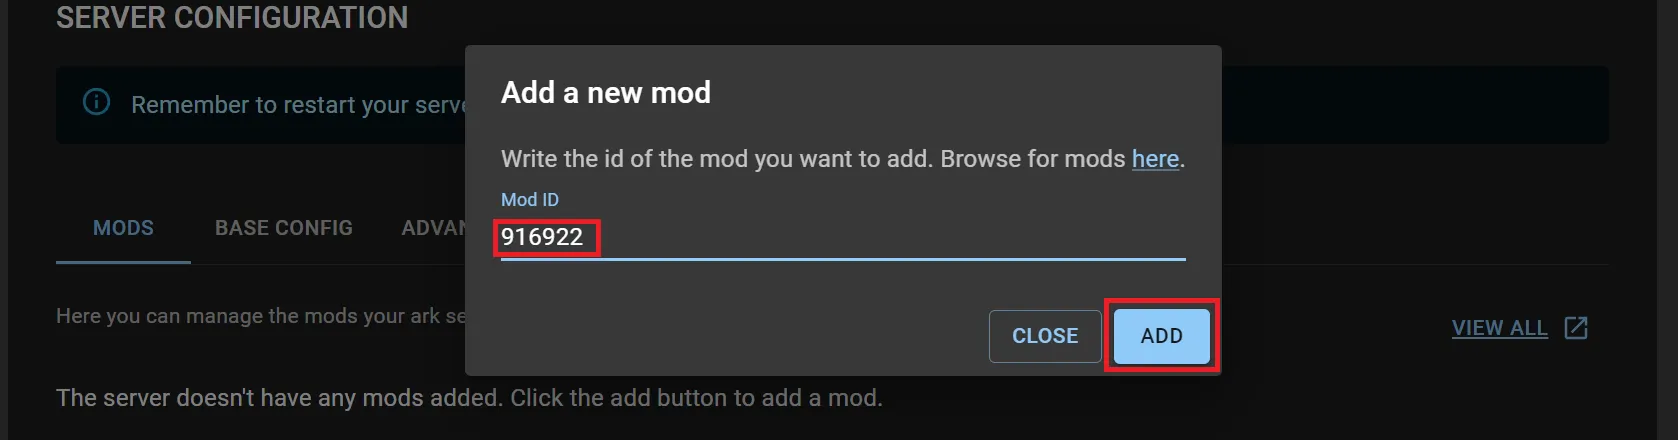 mods add by filled